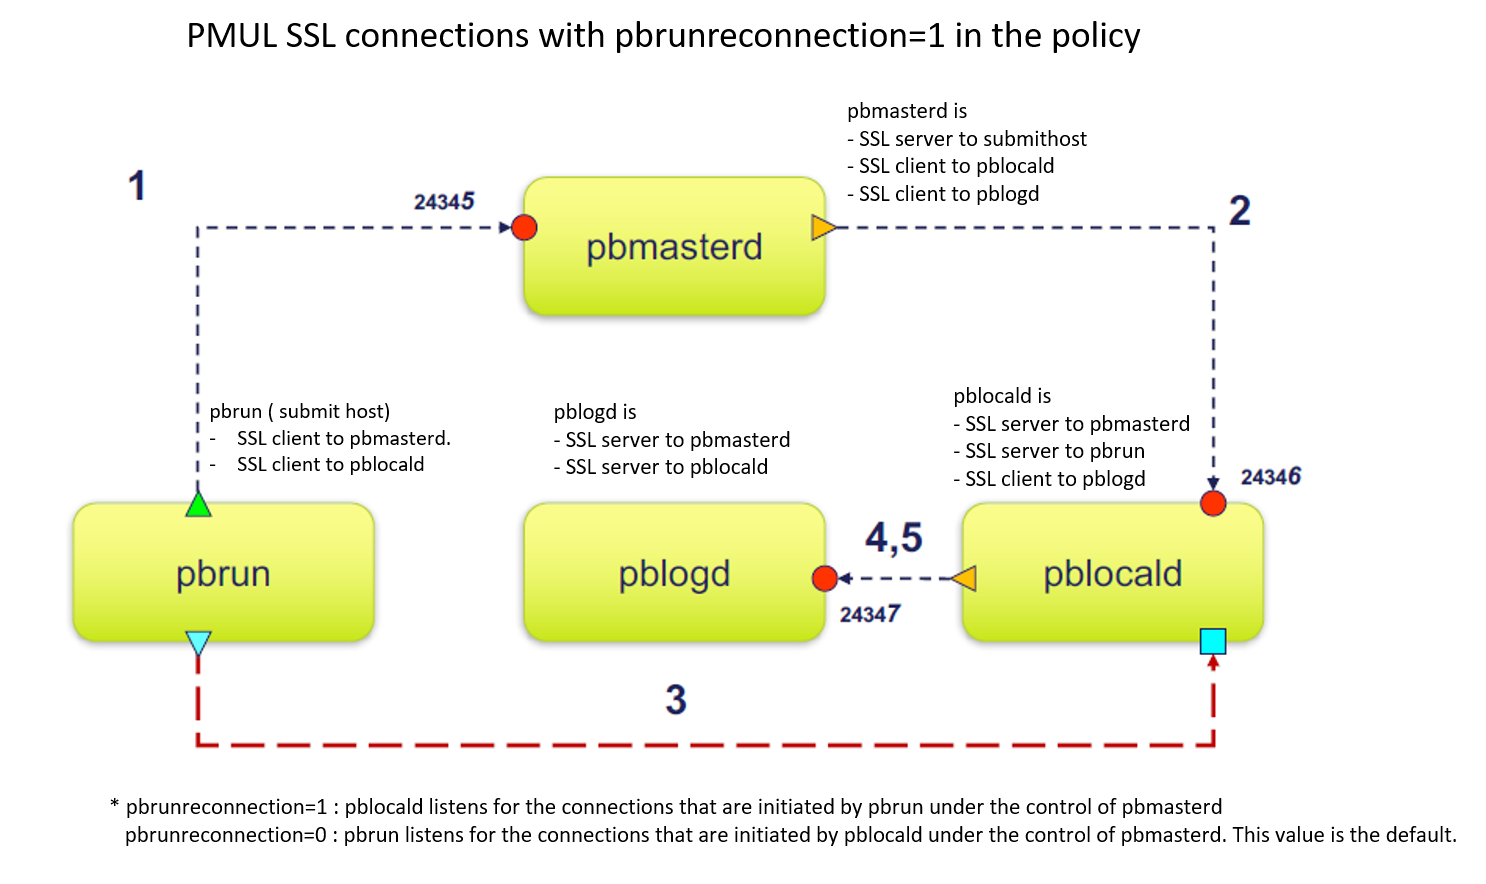 EPM-UL SSL connections with pbrunreconnection=1 in the policy